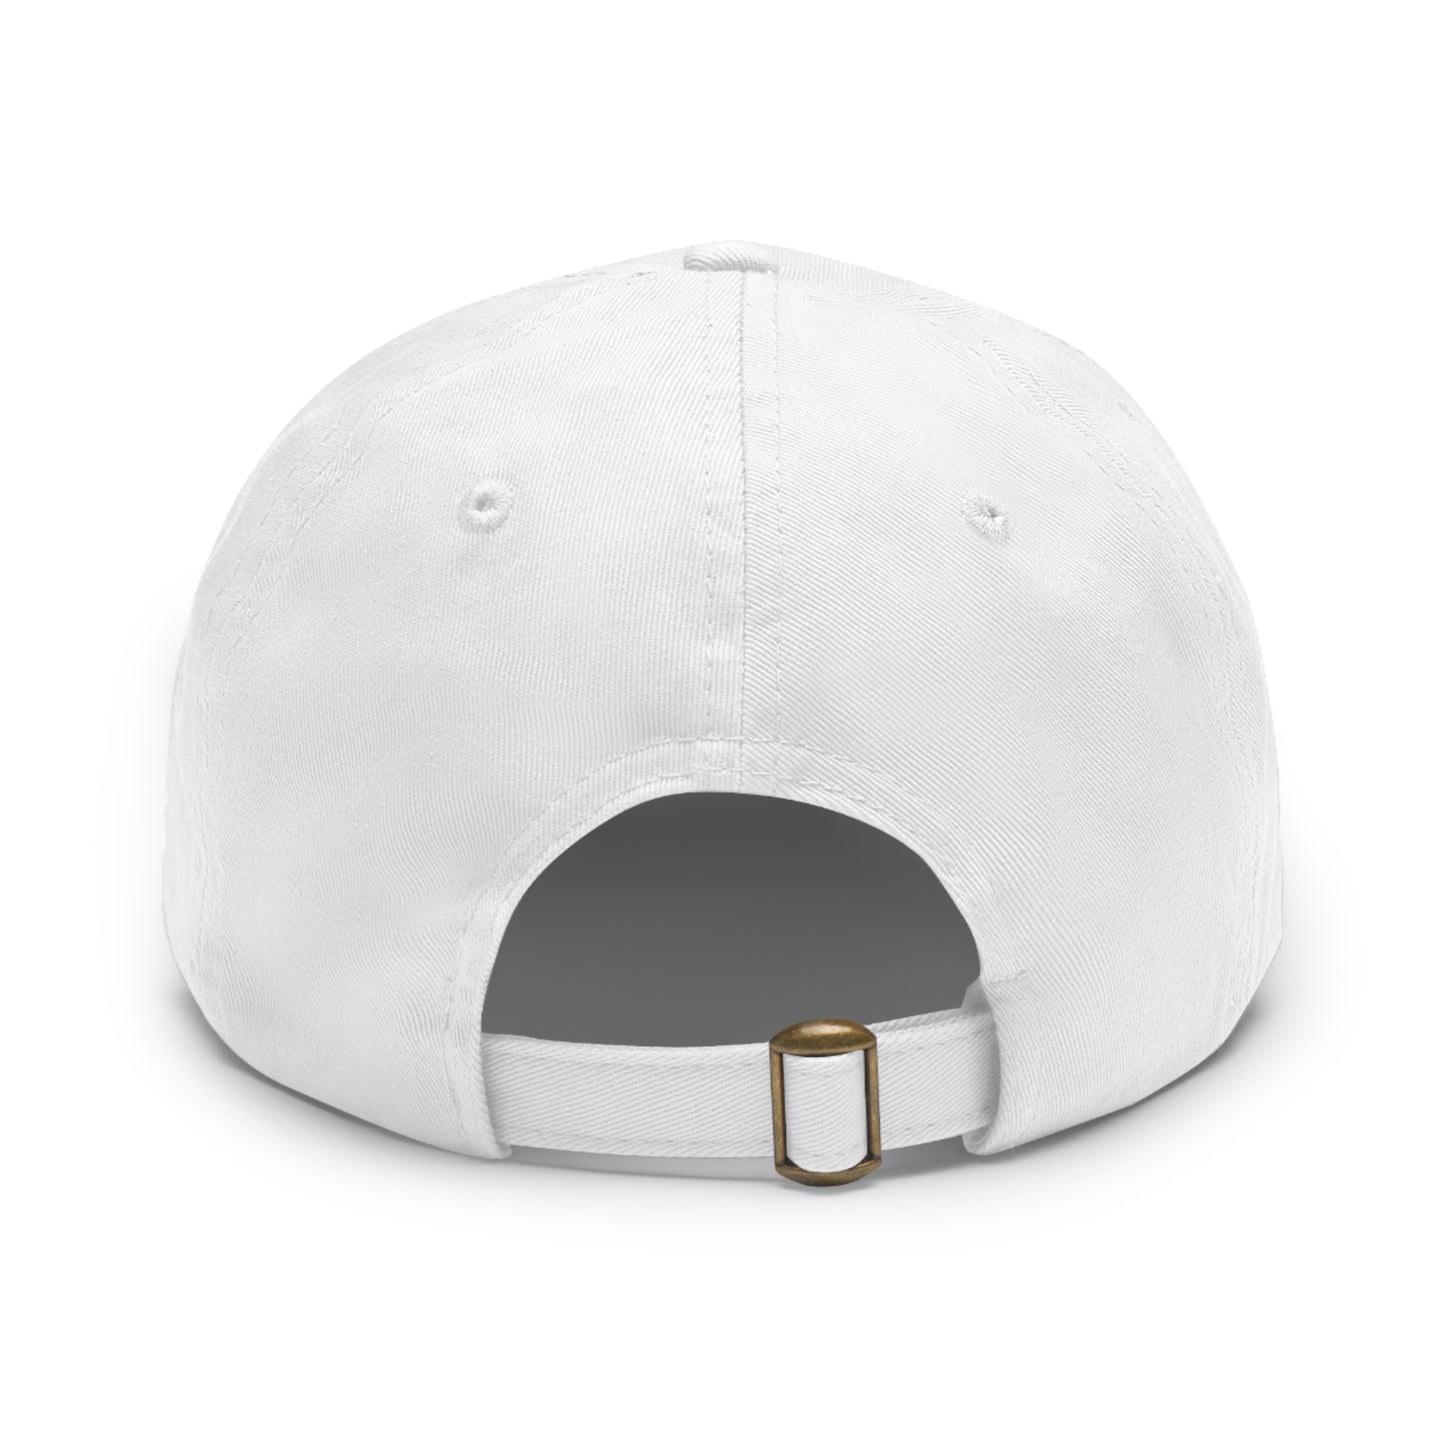 Daddy Logan hat with Leather Patch (Rectangle)